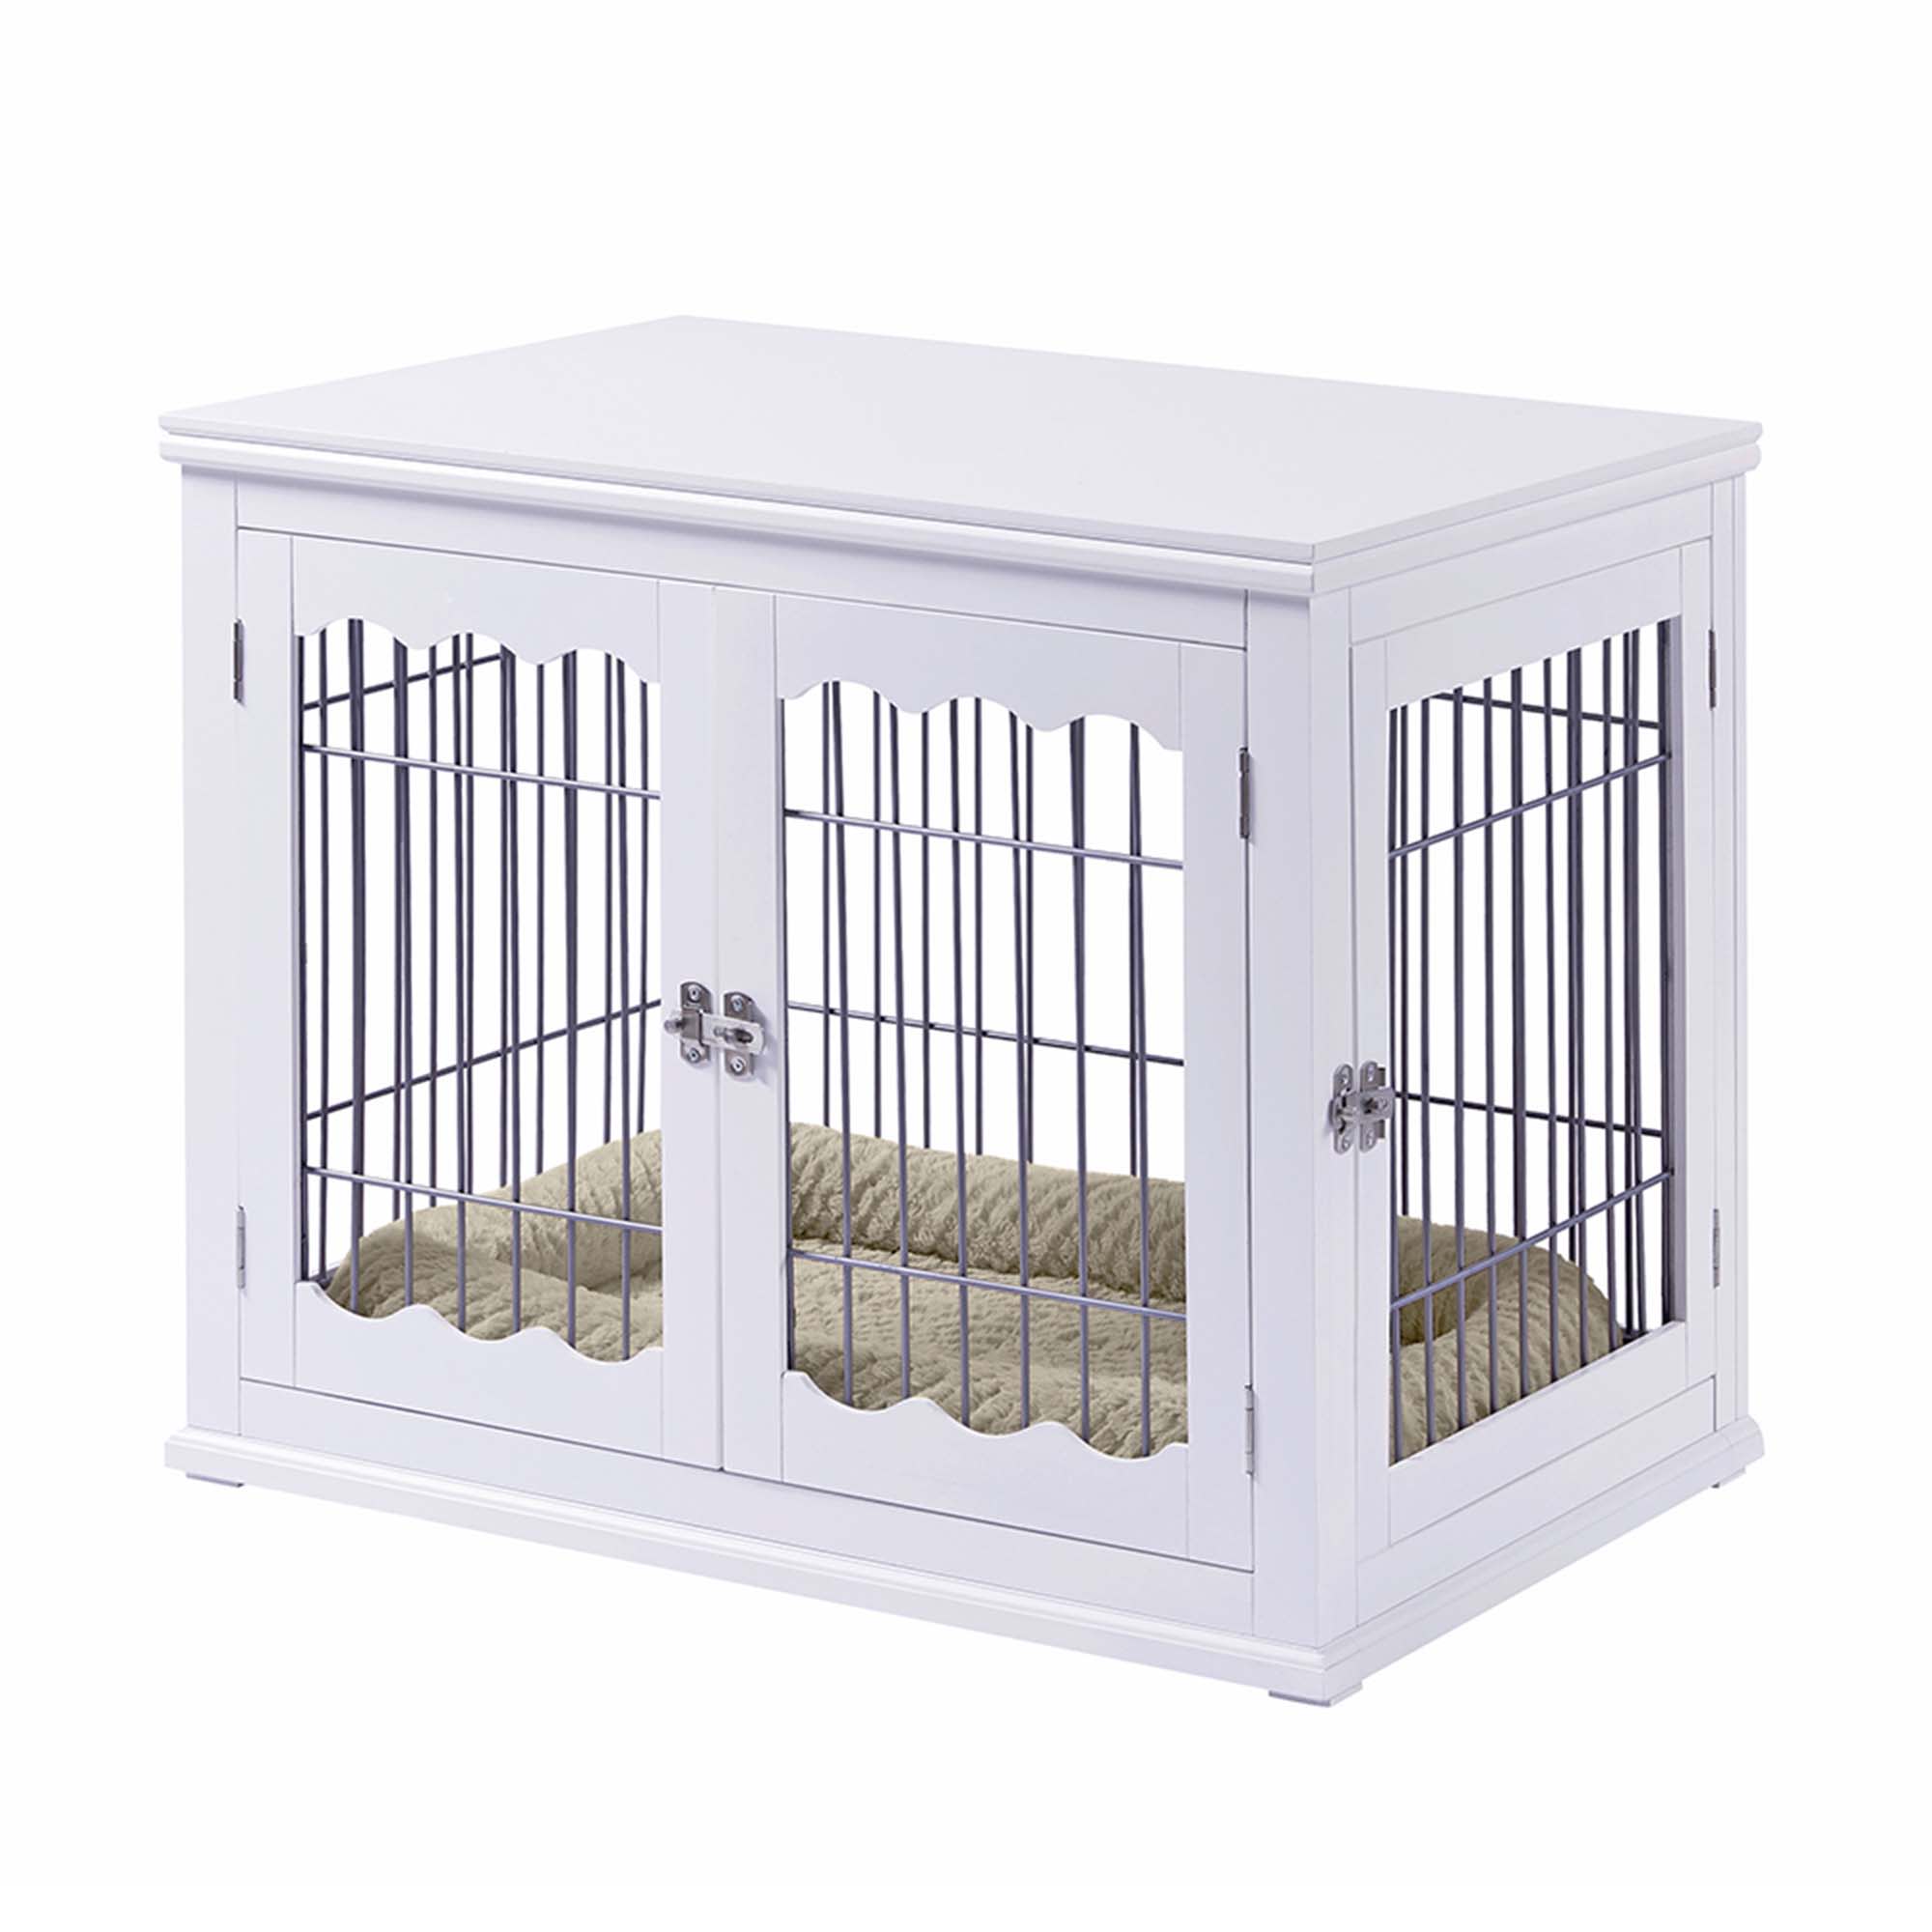 Small Breed Dog Kennel White End Table Cage Crate Pet Wooden Medium Puppy Bed 